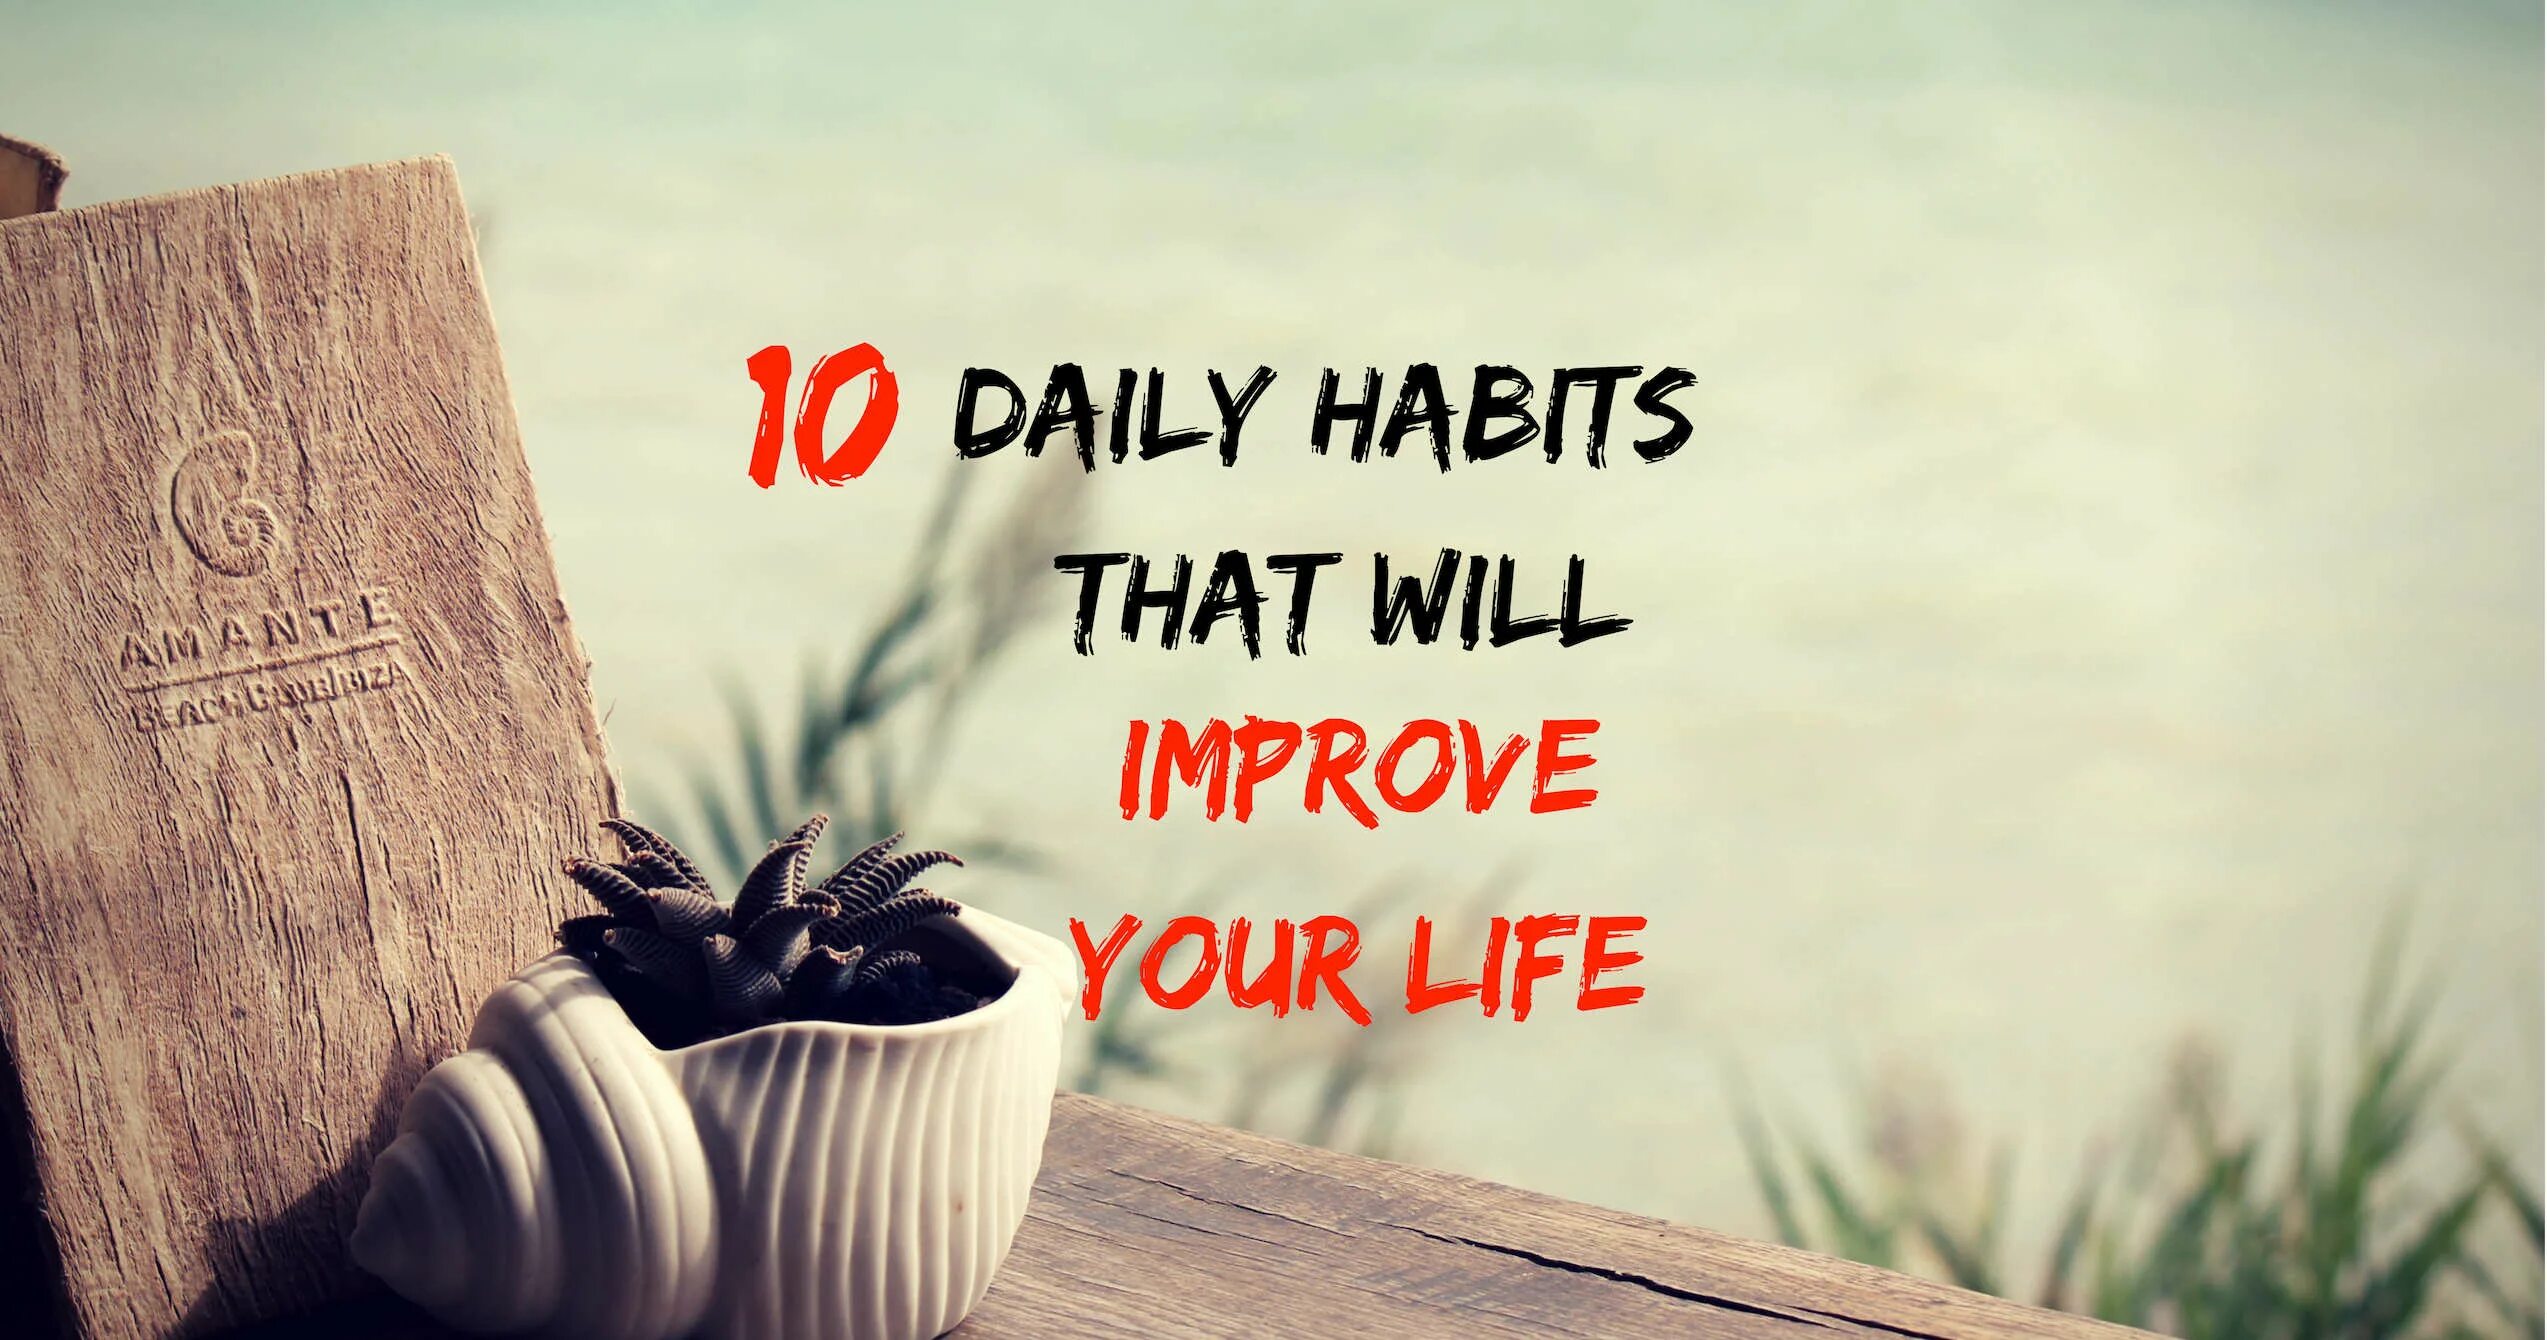 Have this life of mine. Daily Habits. Habits that will change your Life. Improve your Habits. The Daily a good Habits.